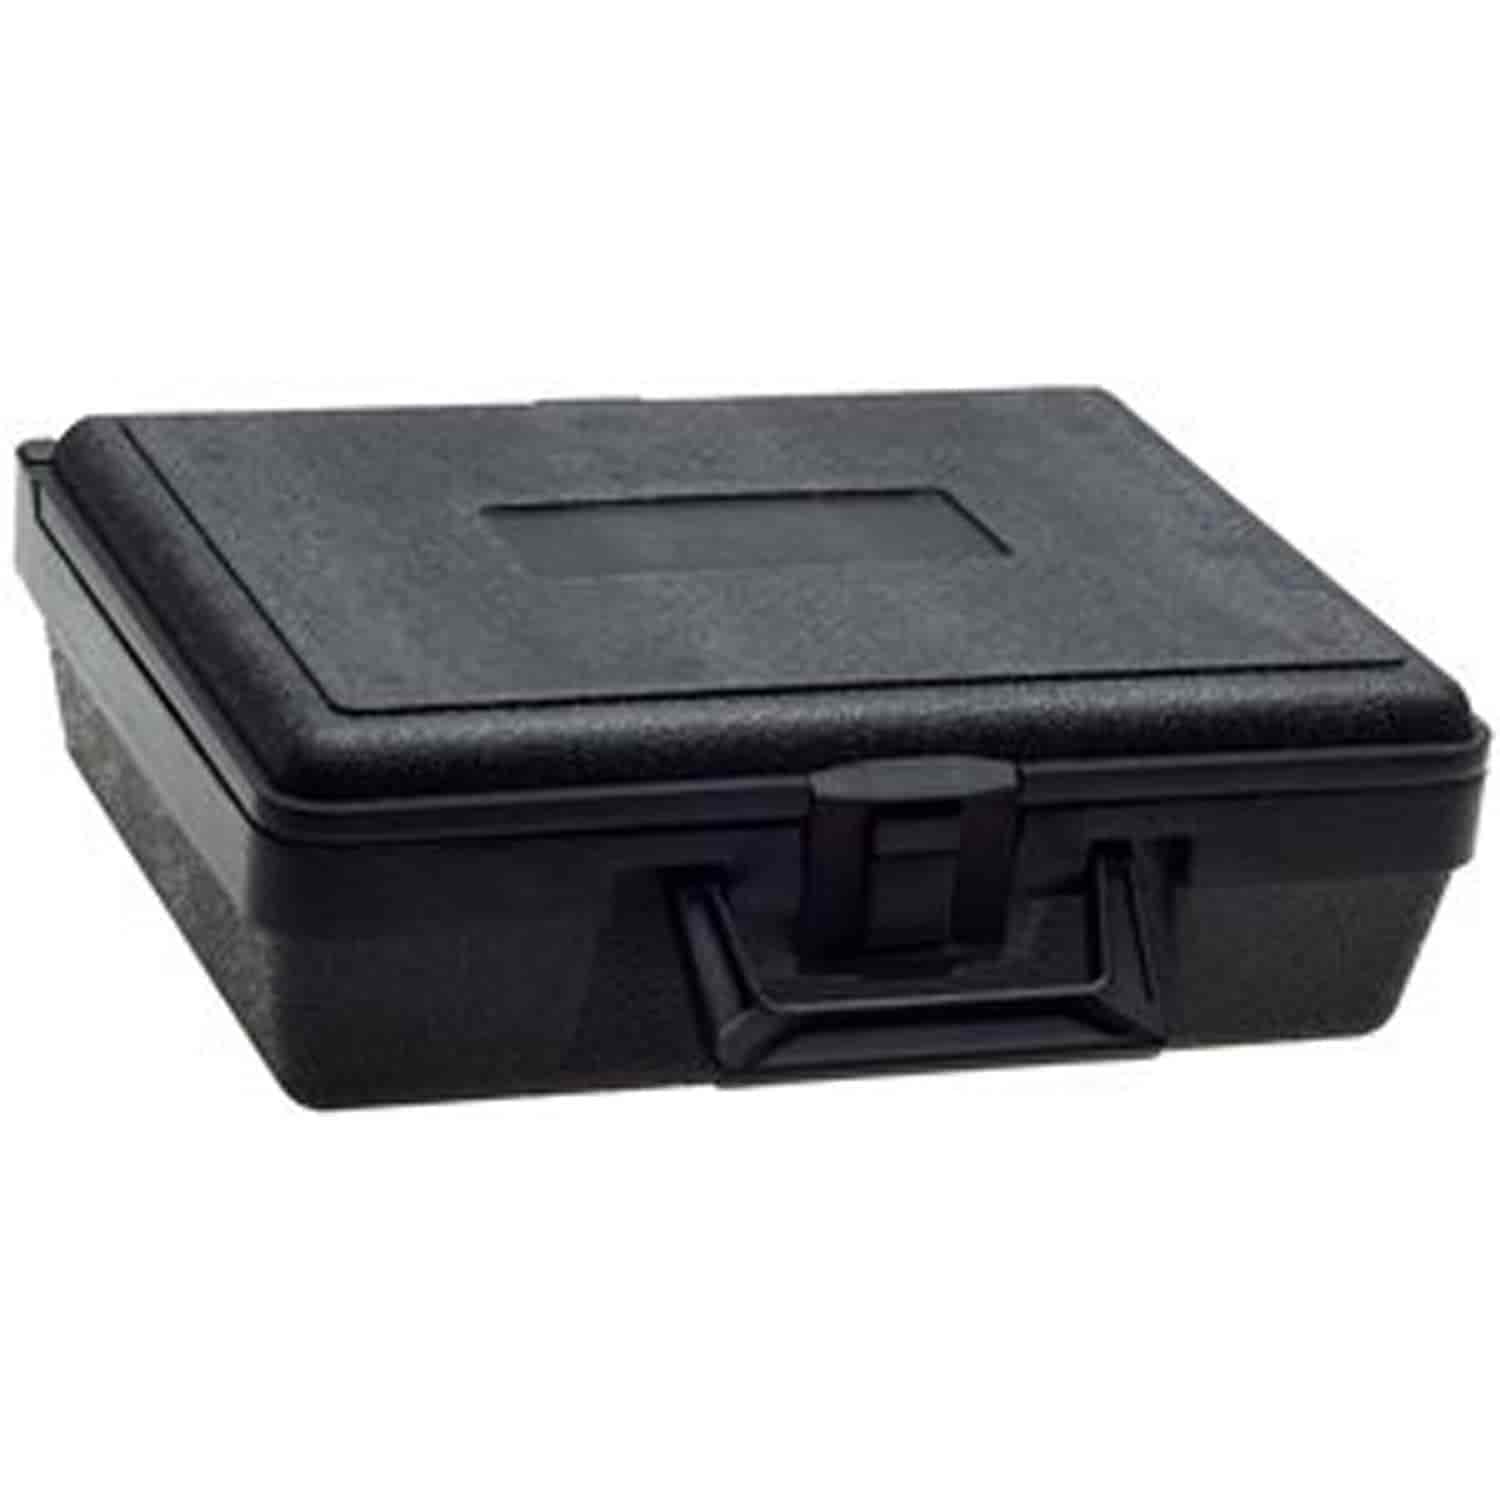 Adapter Carrying Case